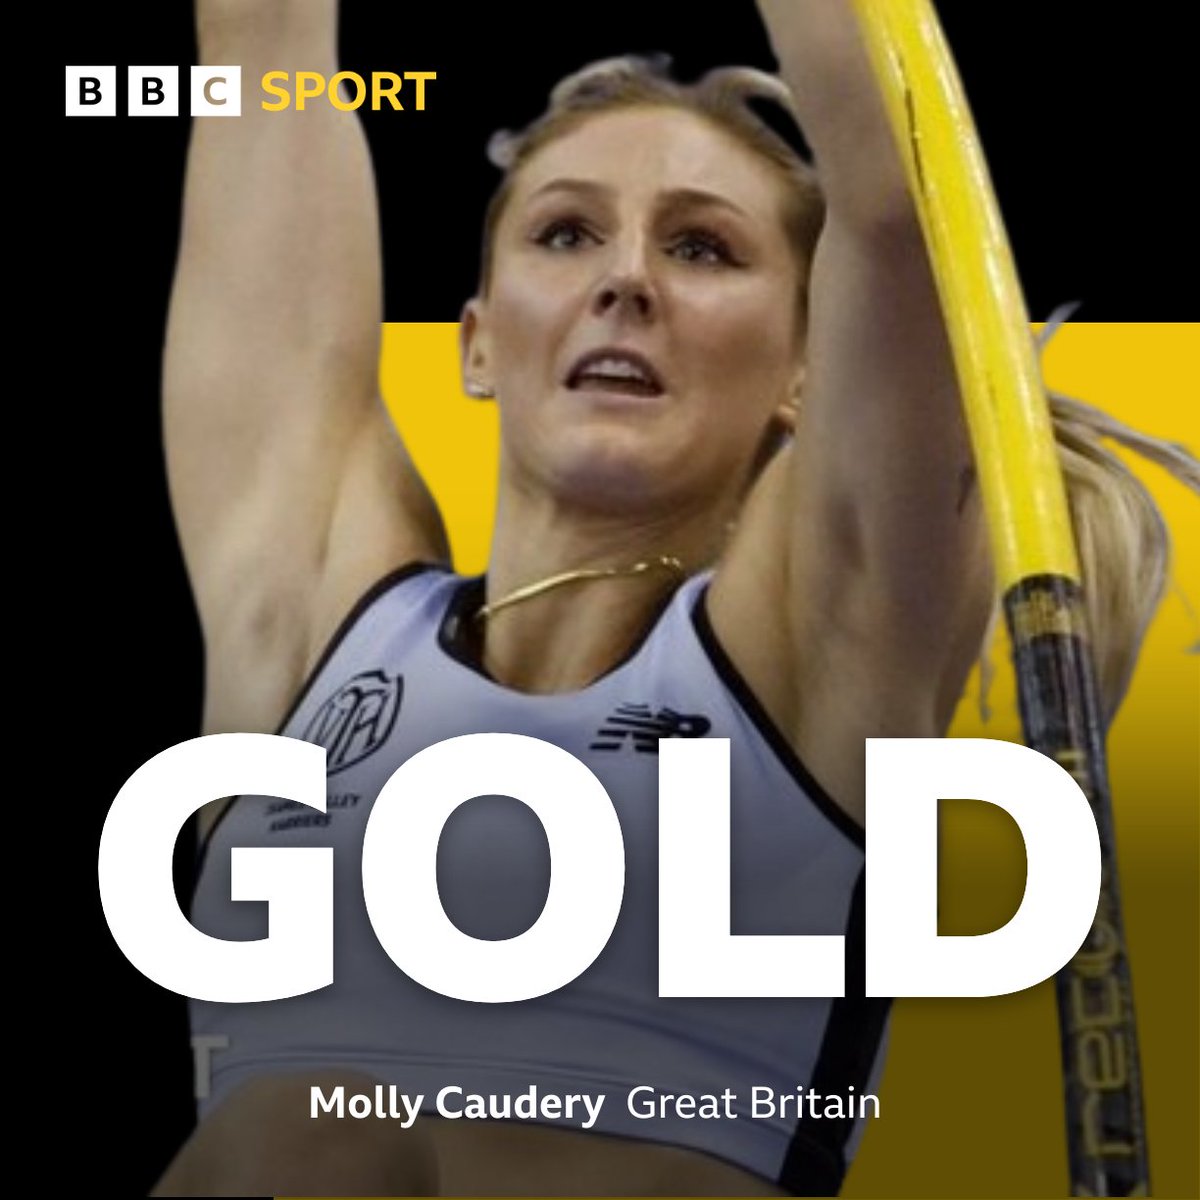 MOLLY CAUDERY IS THE WORLD INDOOR CHAMPION!